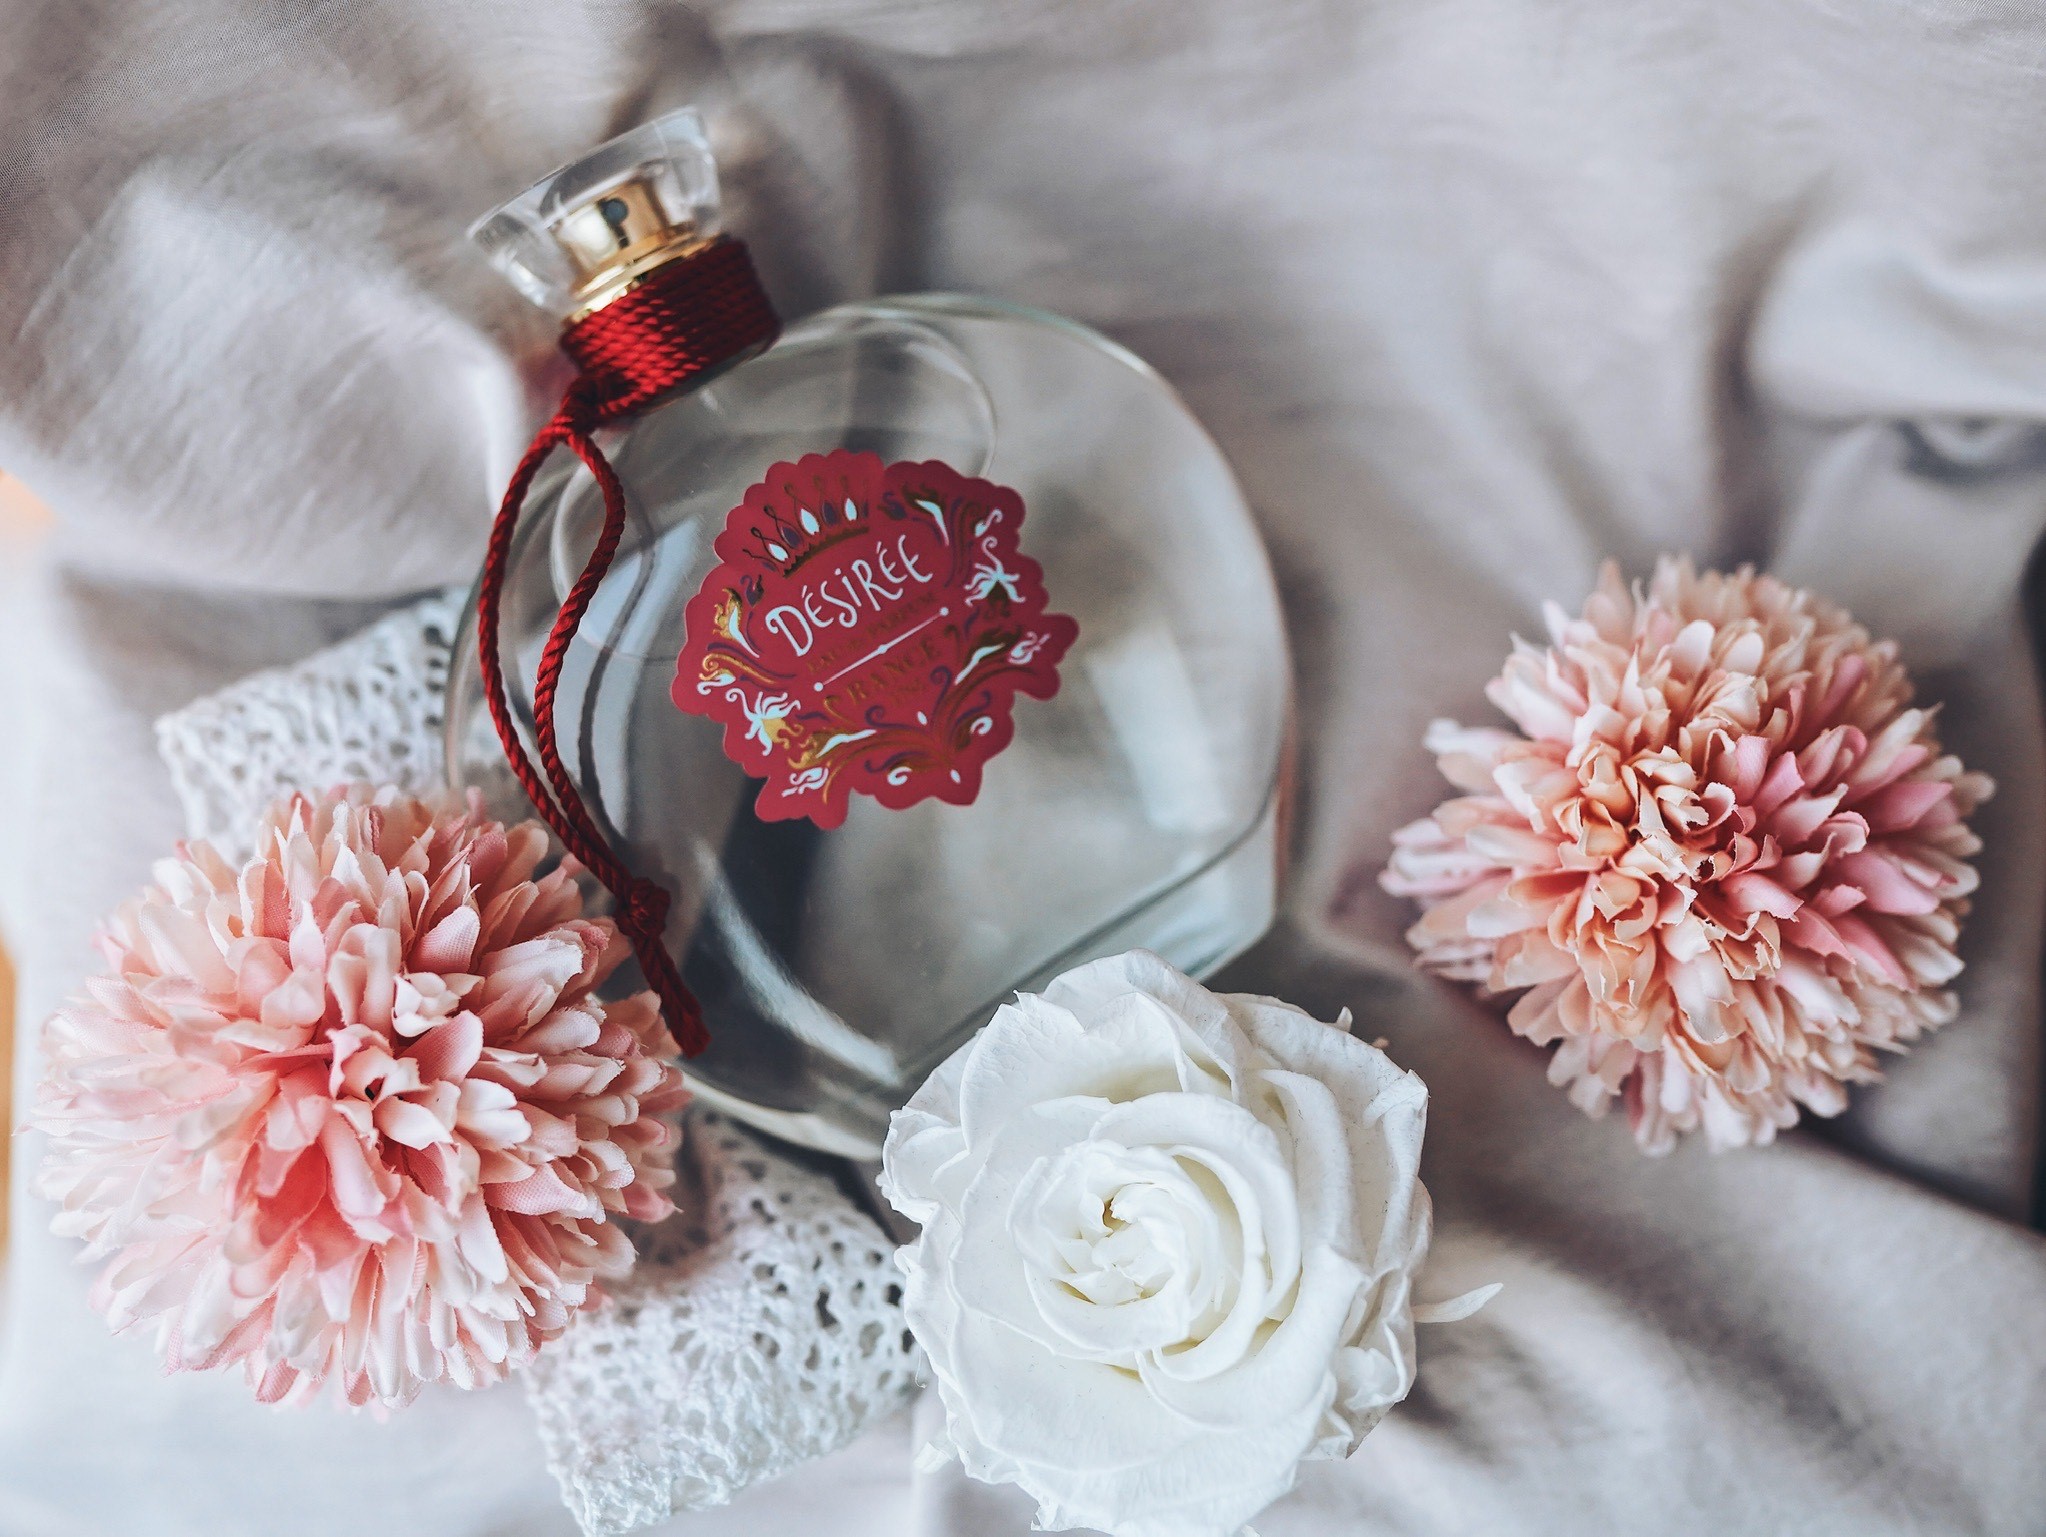 Of sneaked kisses and springtime scents: Désirée according to Ade Scents